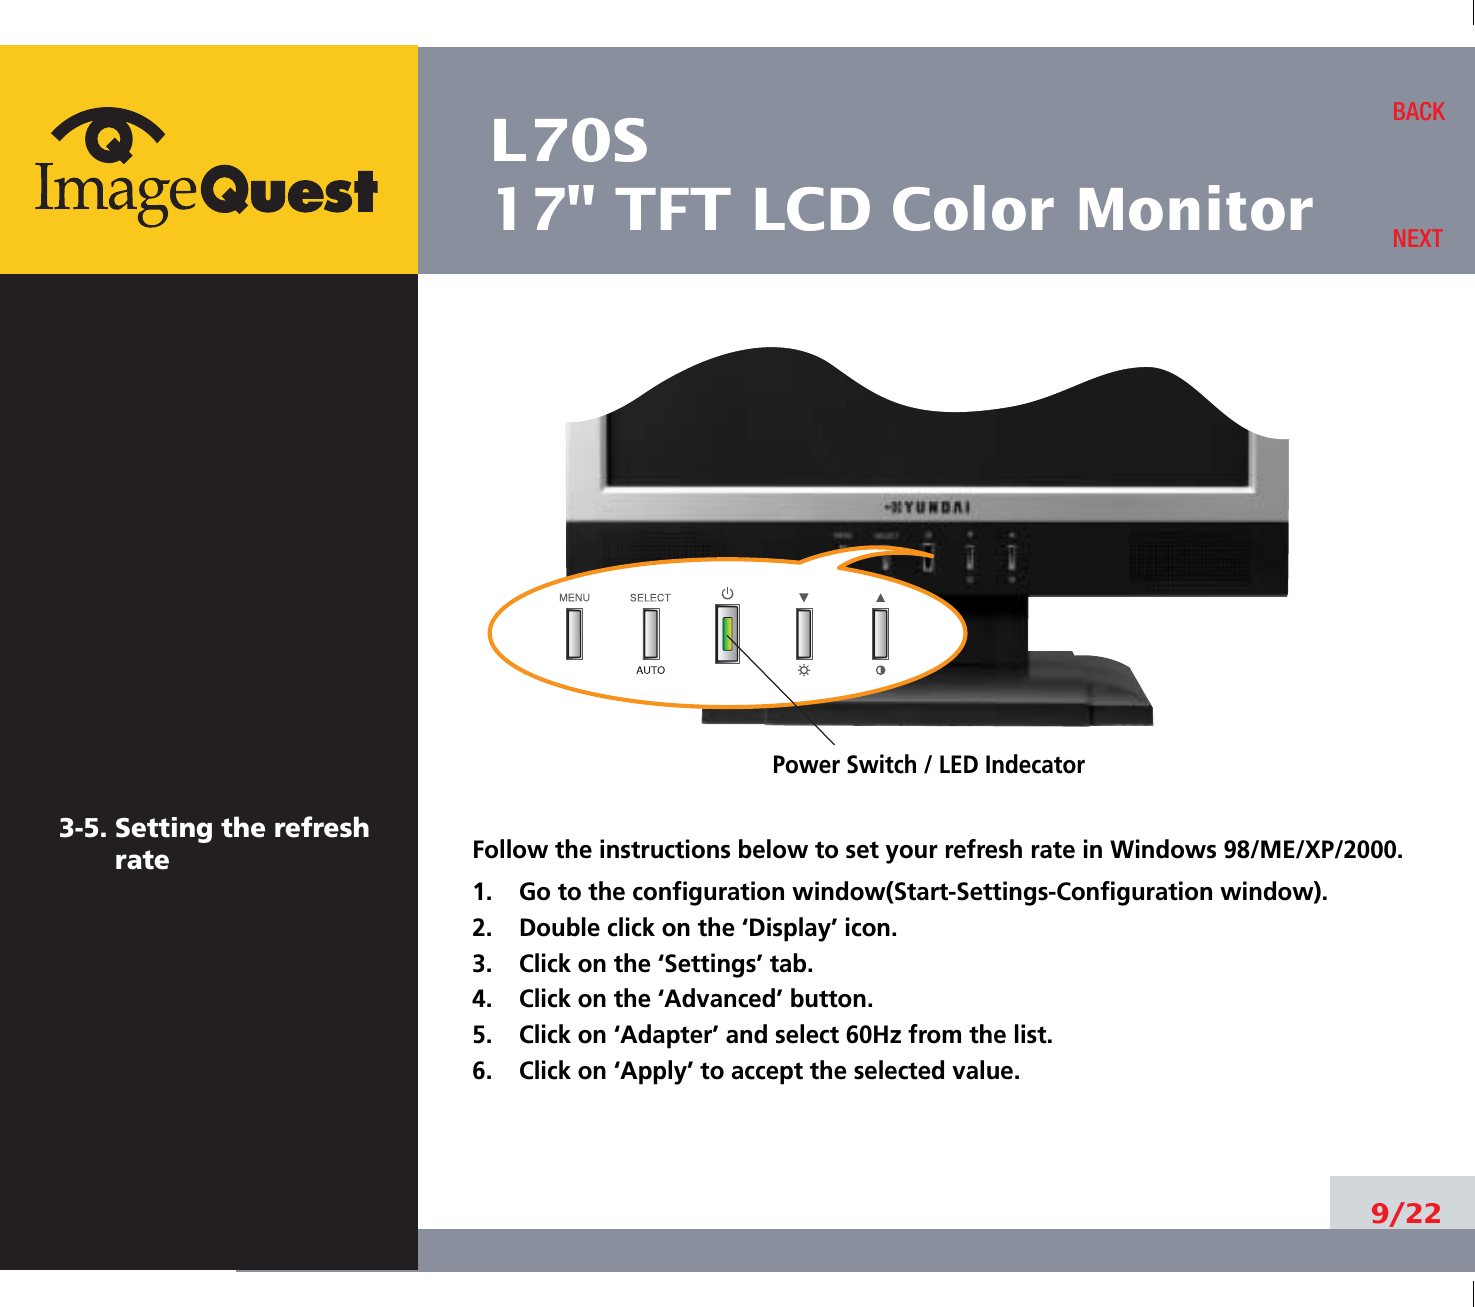 L70S17&quot; TFT LCD Color Monitor9/22BACKNEXT3-5. Setting the refreshrate Follow the instructions below to set your refresh rate in Windows 98/ME/XP/2000.1.    Go to the configuration window(Start-Settings-Configuration window).2.    Double click on the ‘Display’ icon.3.    Click on the ‘Settings’ tab.4.    Click on the ‘Advanced’ button.5.    Click on ‘Adapter’ and select 60Hz from the list.6.    Click on ‘Apply’ to accept the selected value.Power Switch / LED Indecator